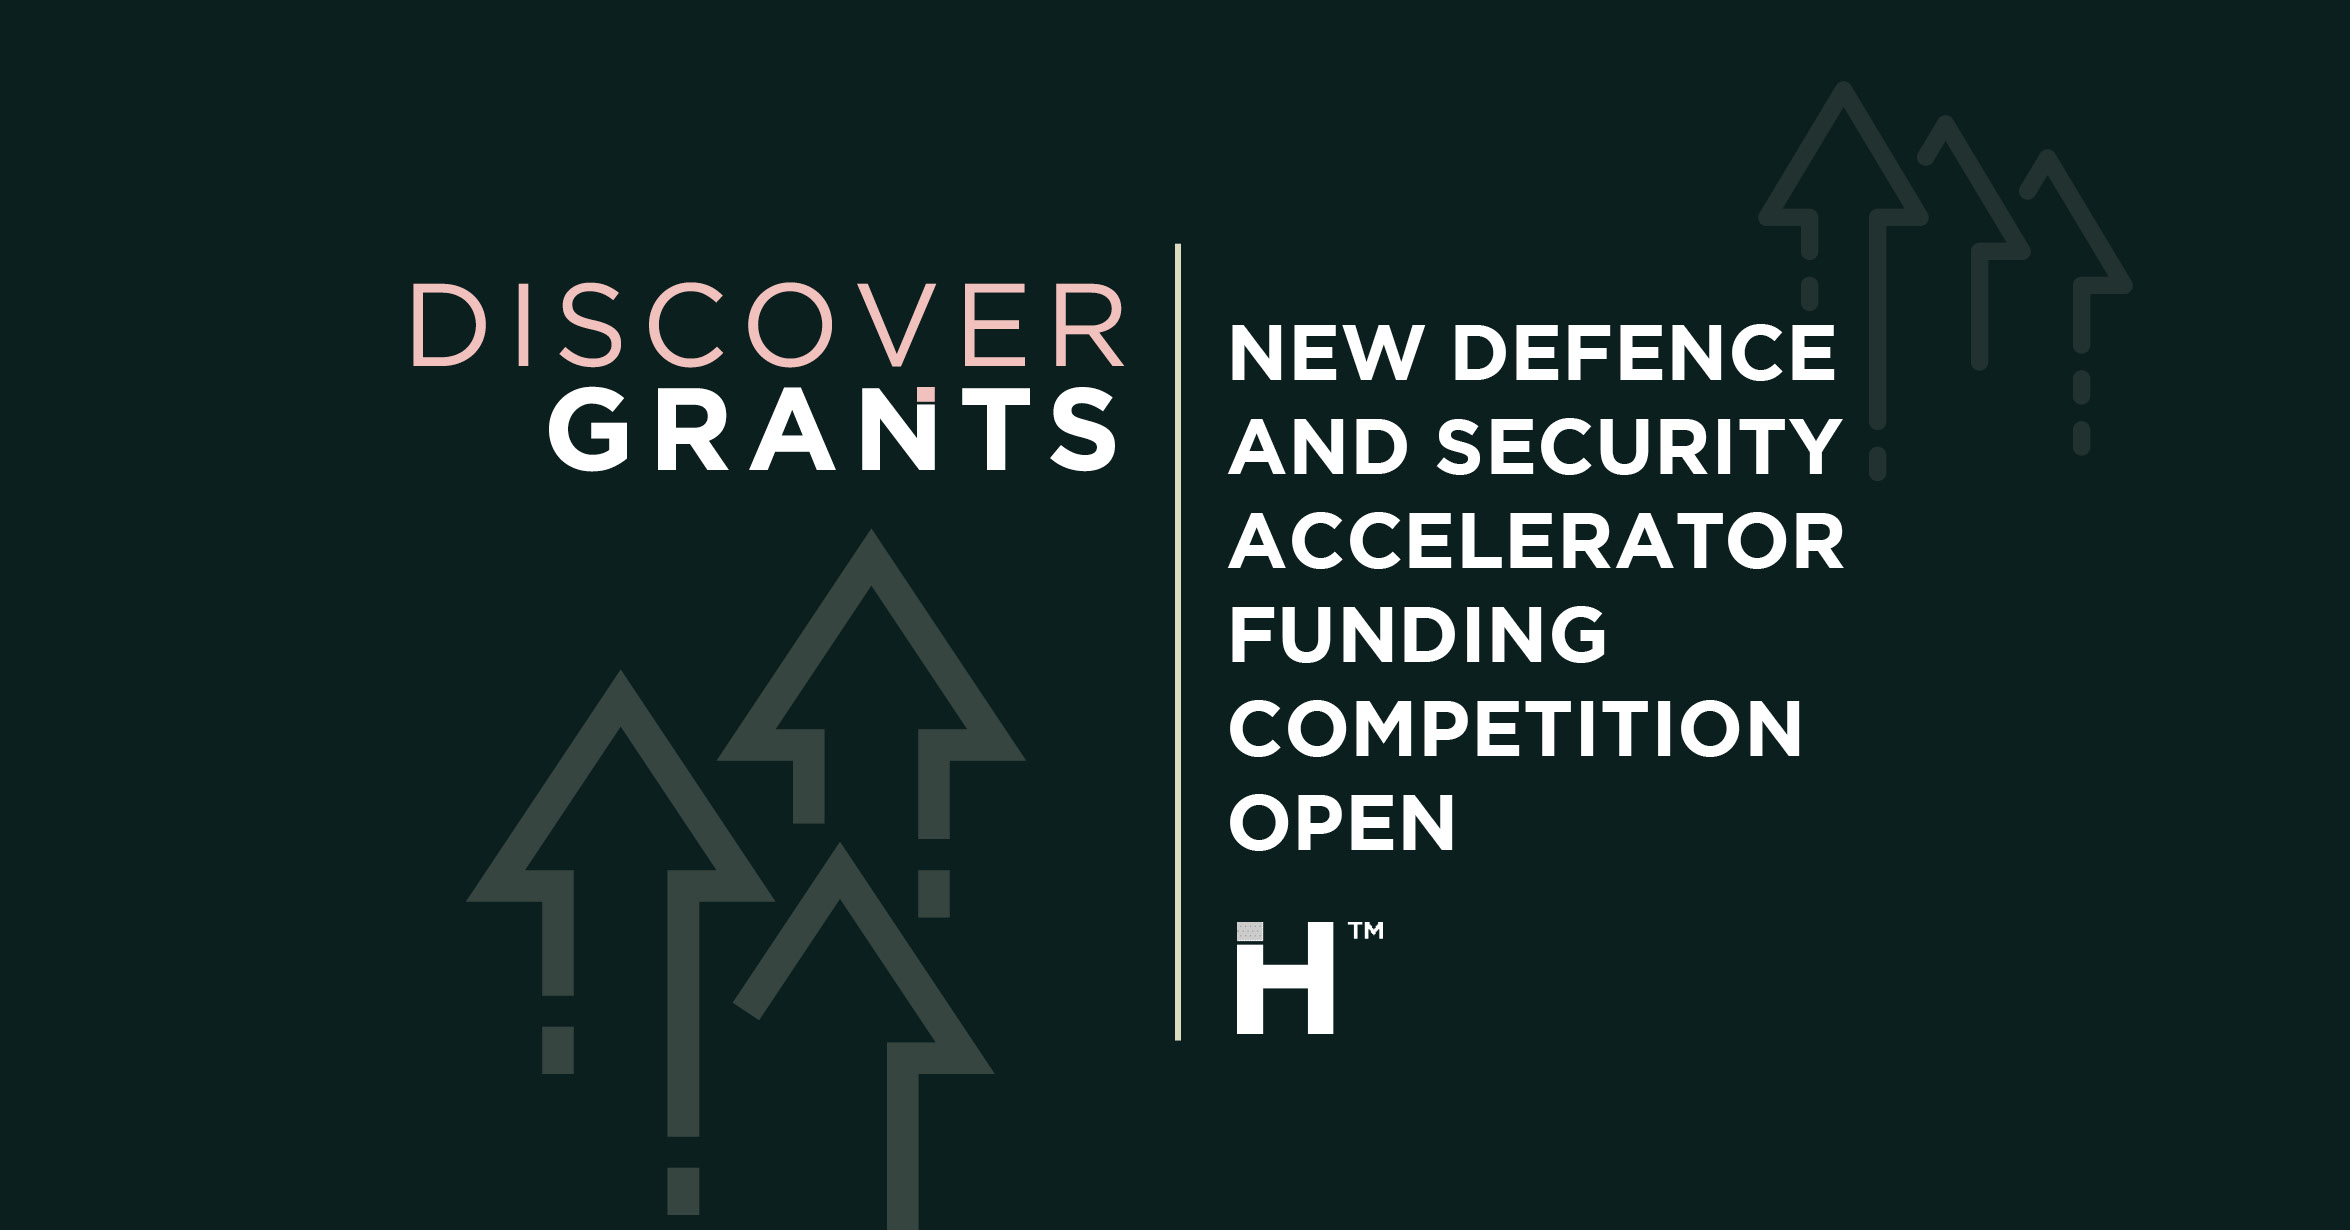 New £1 Million Defence and Security Accelerator Funding Competition Announced